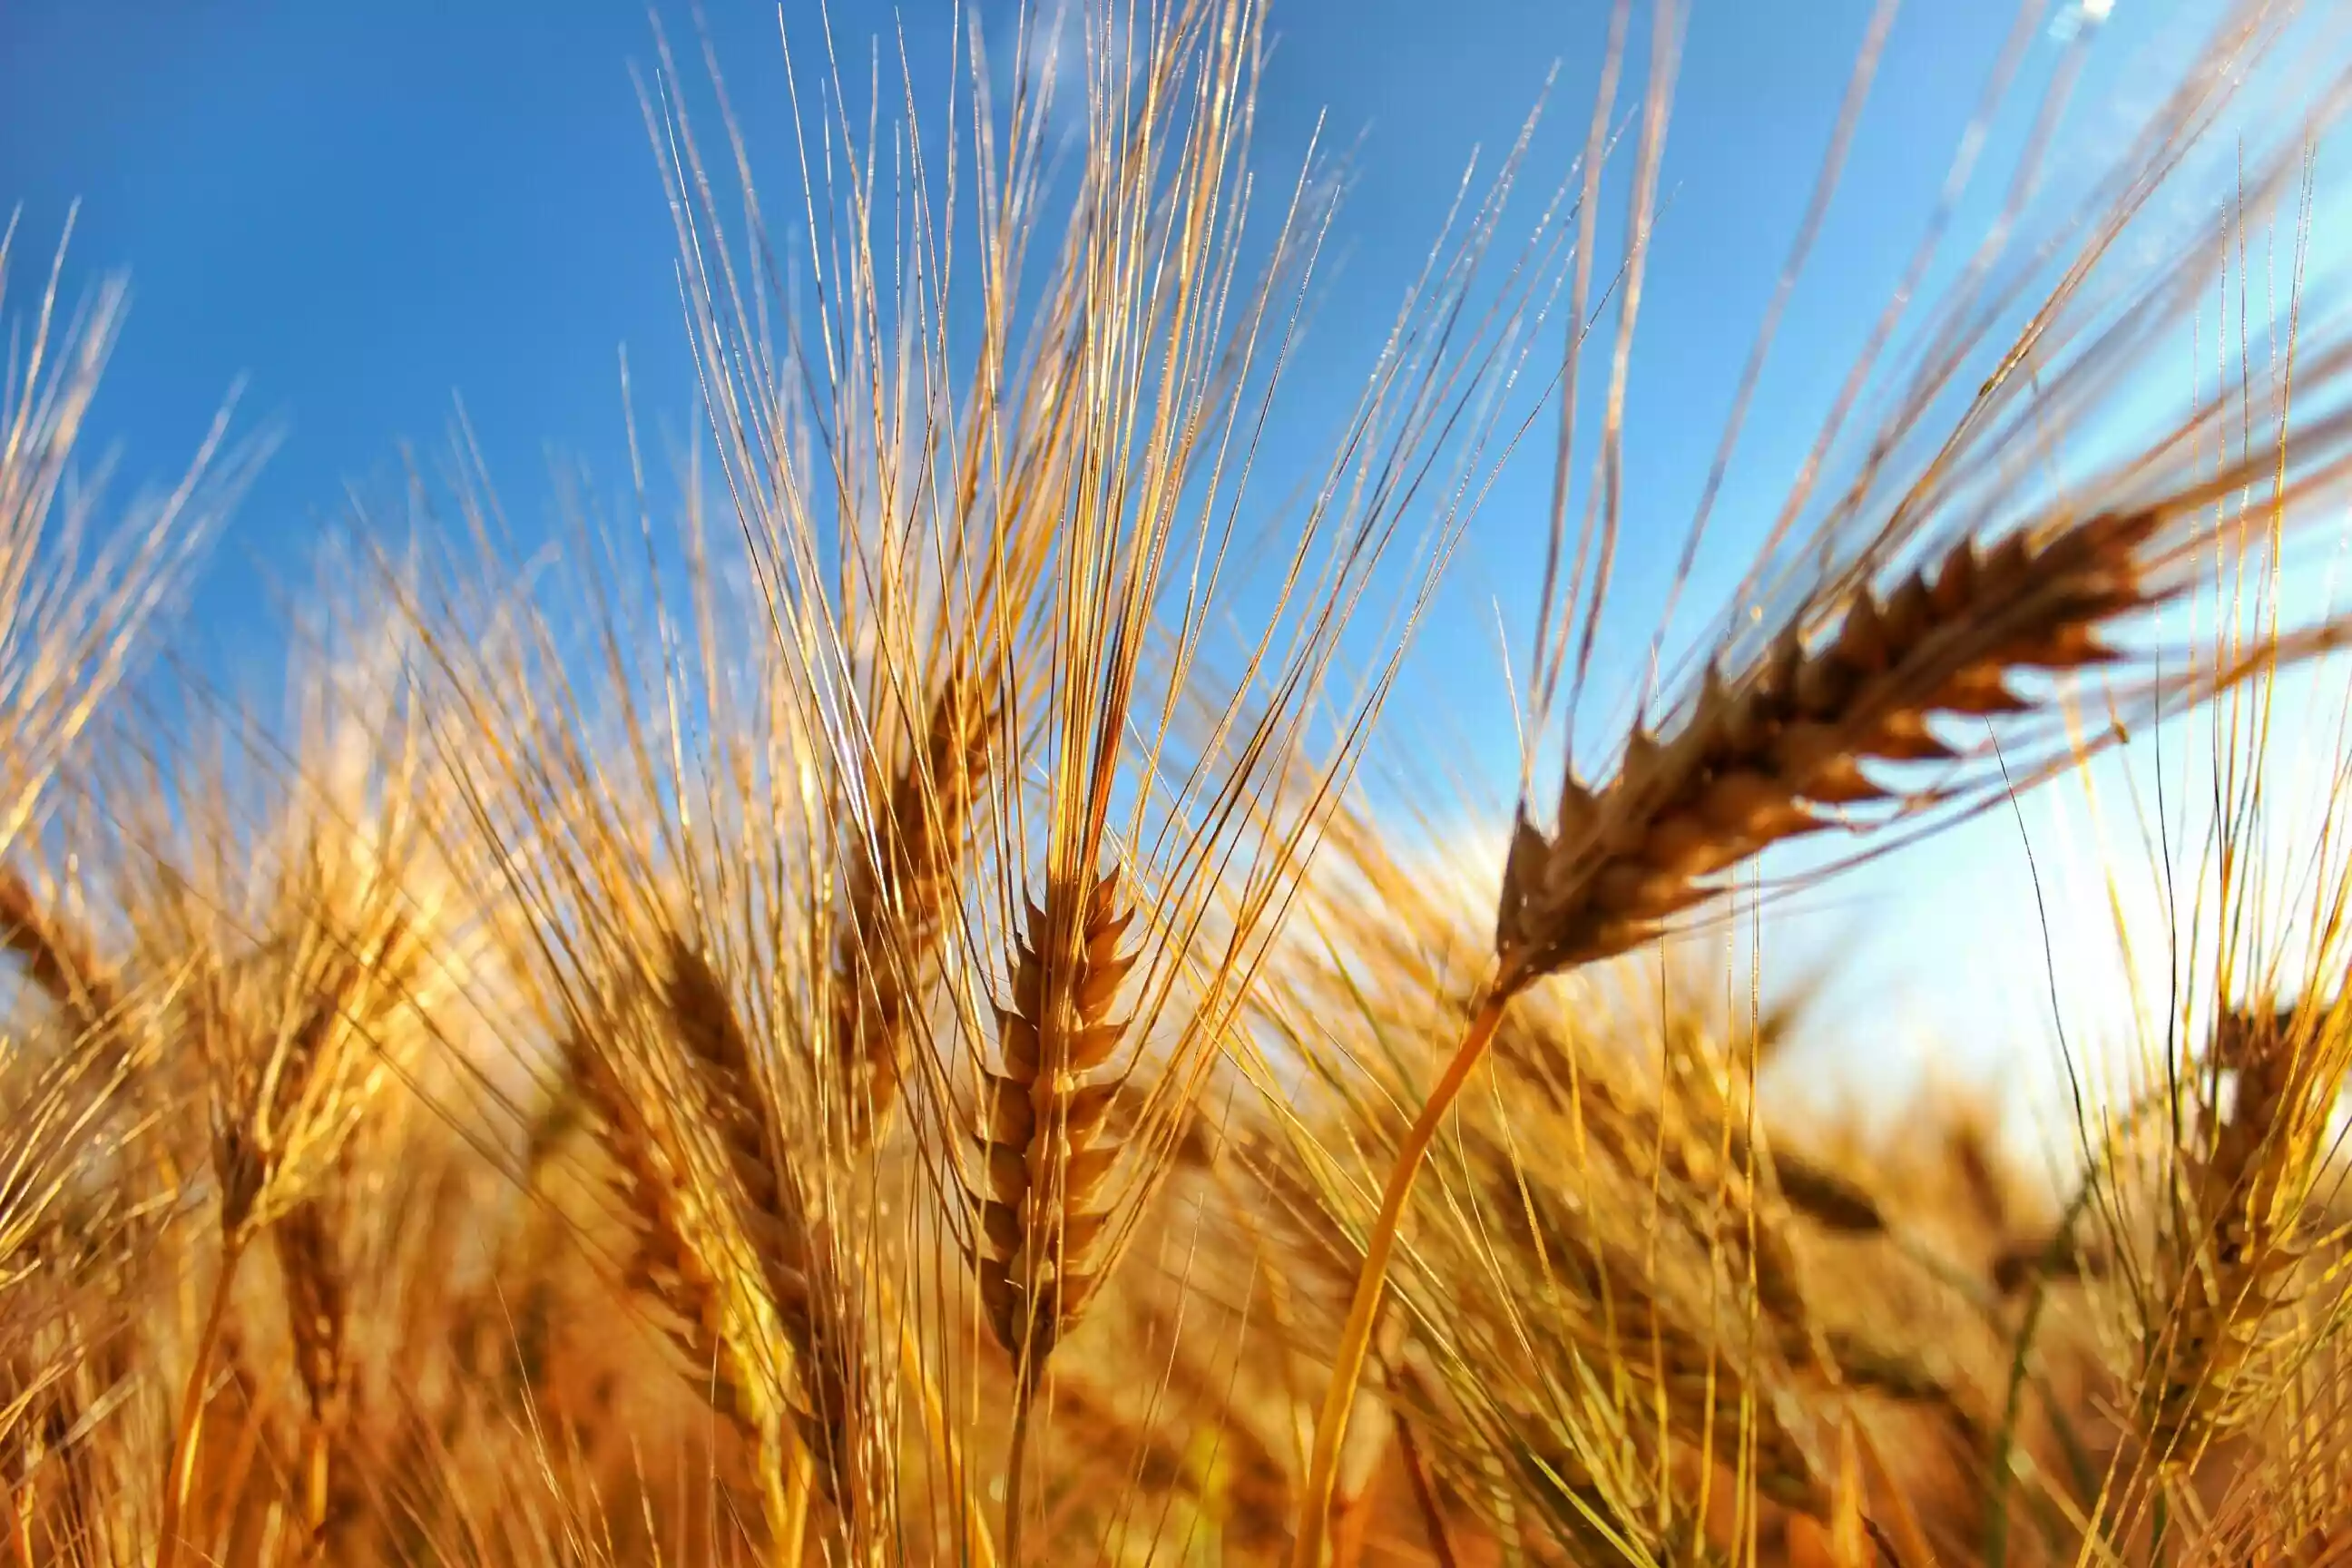 Close-Up Of Wheat Growing On Field Against Sky